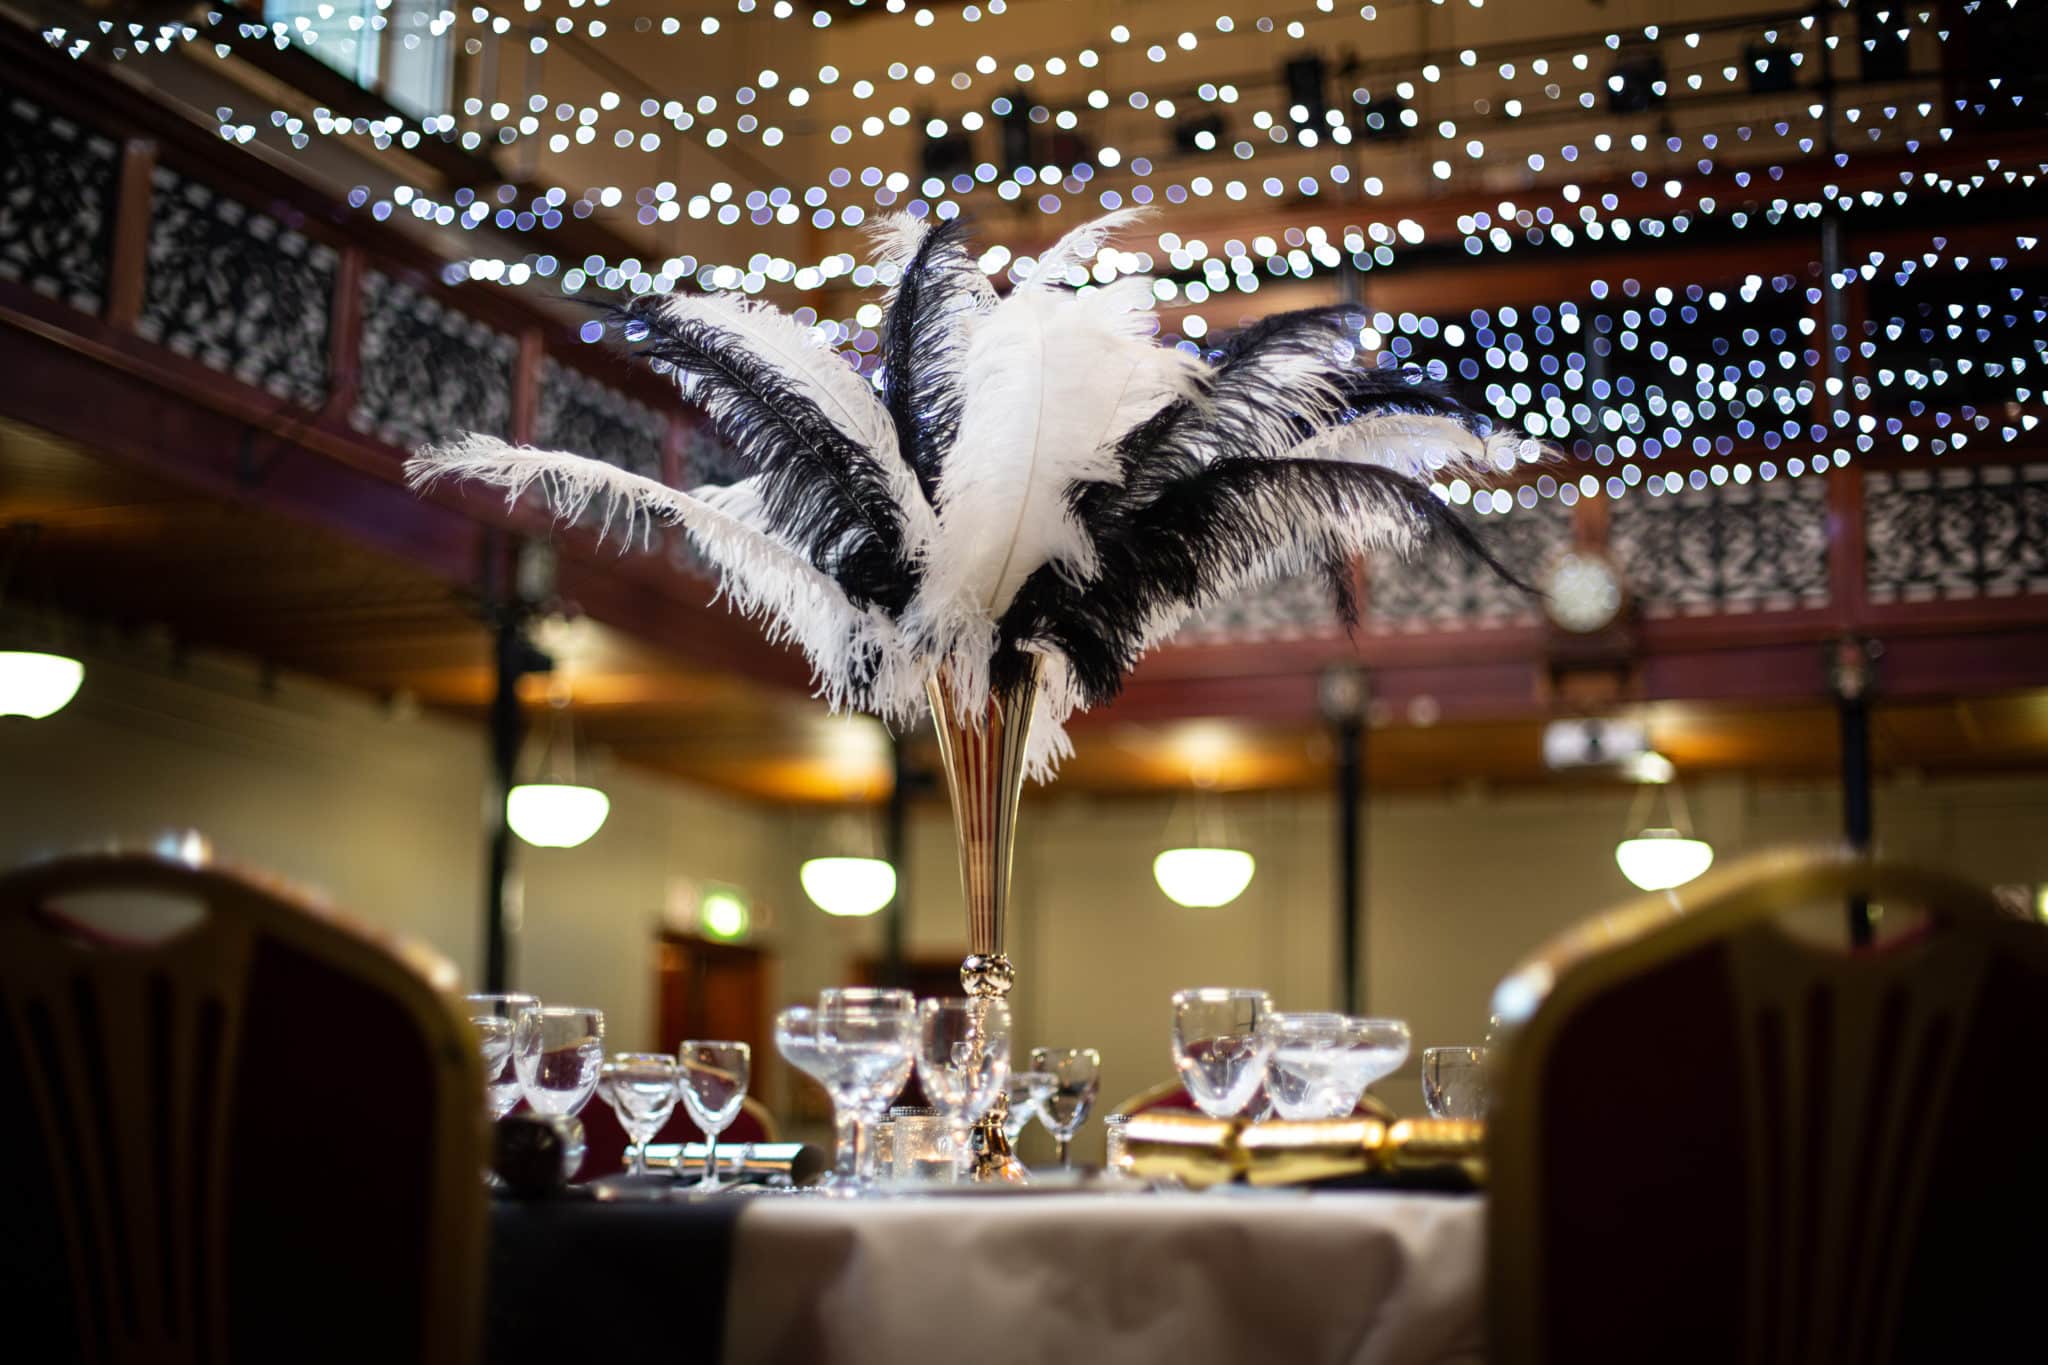 Table with large black and white feathers in the middle